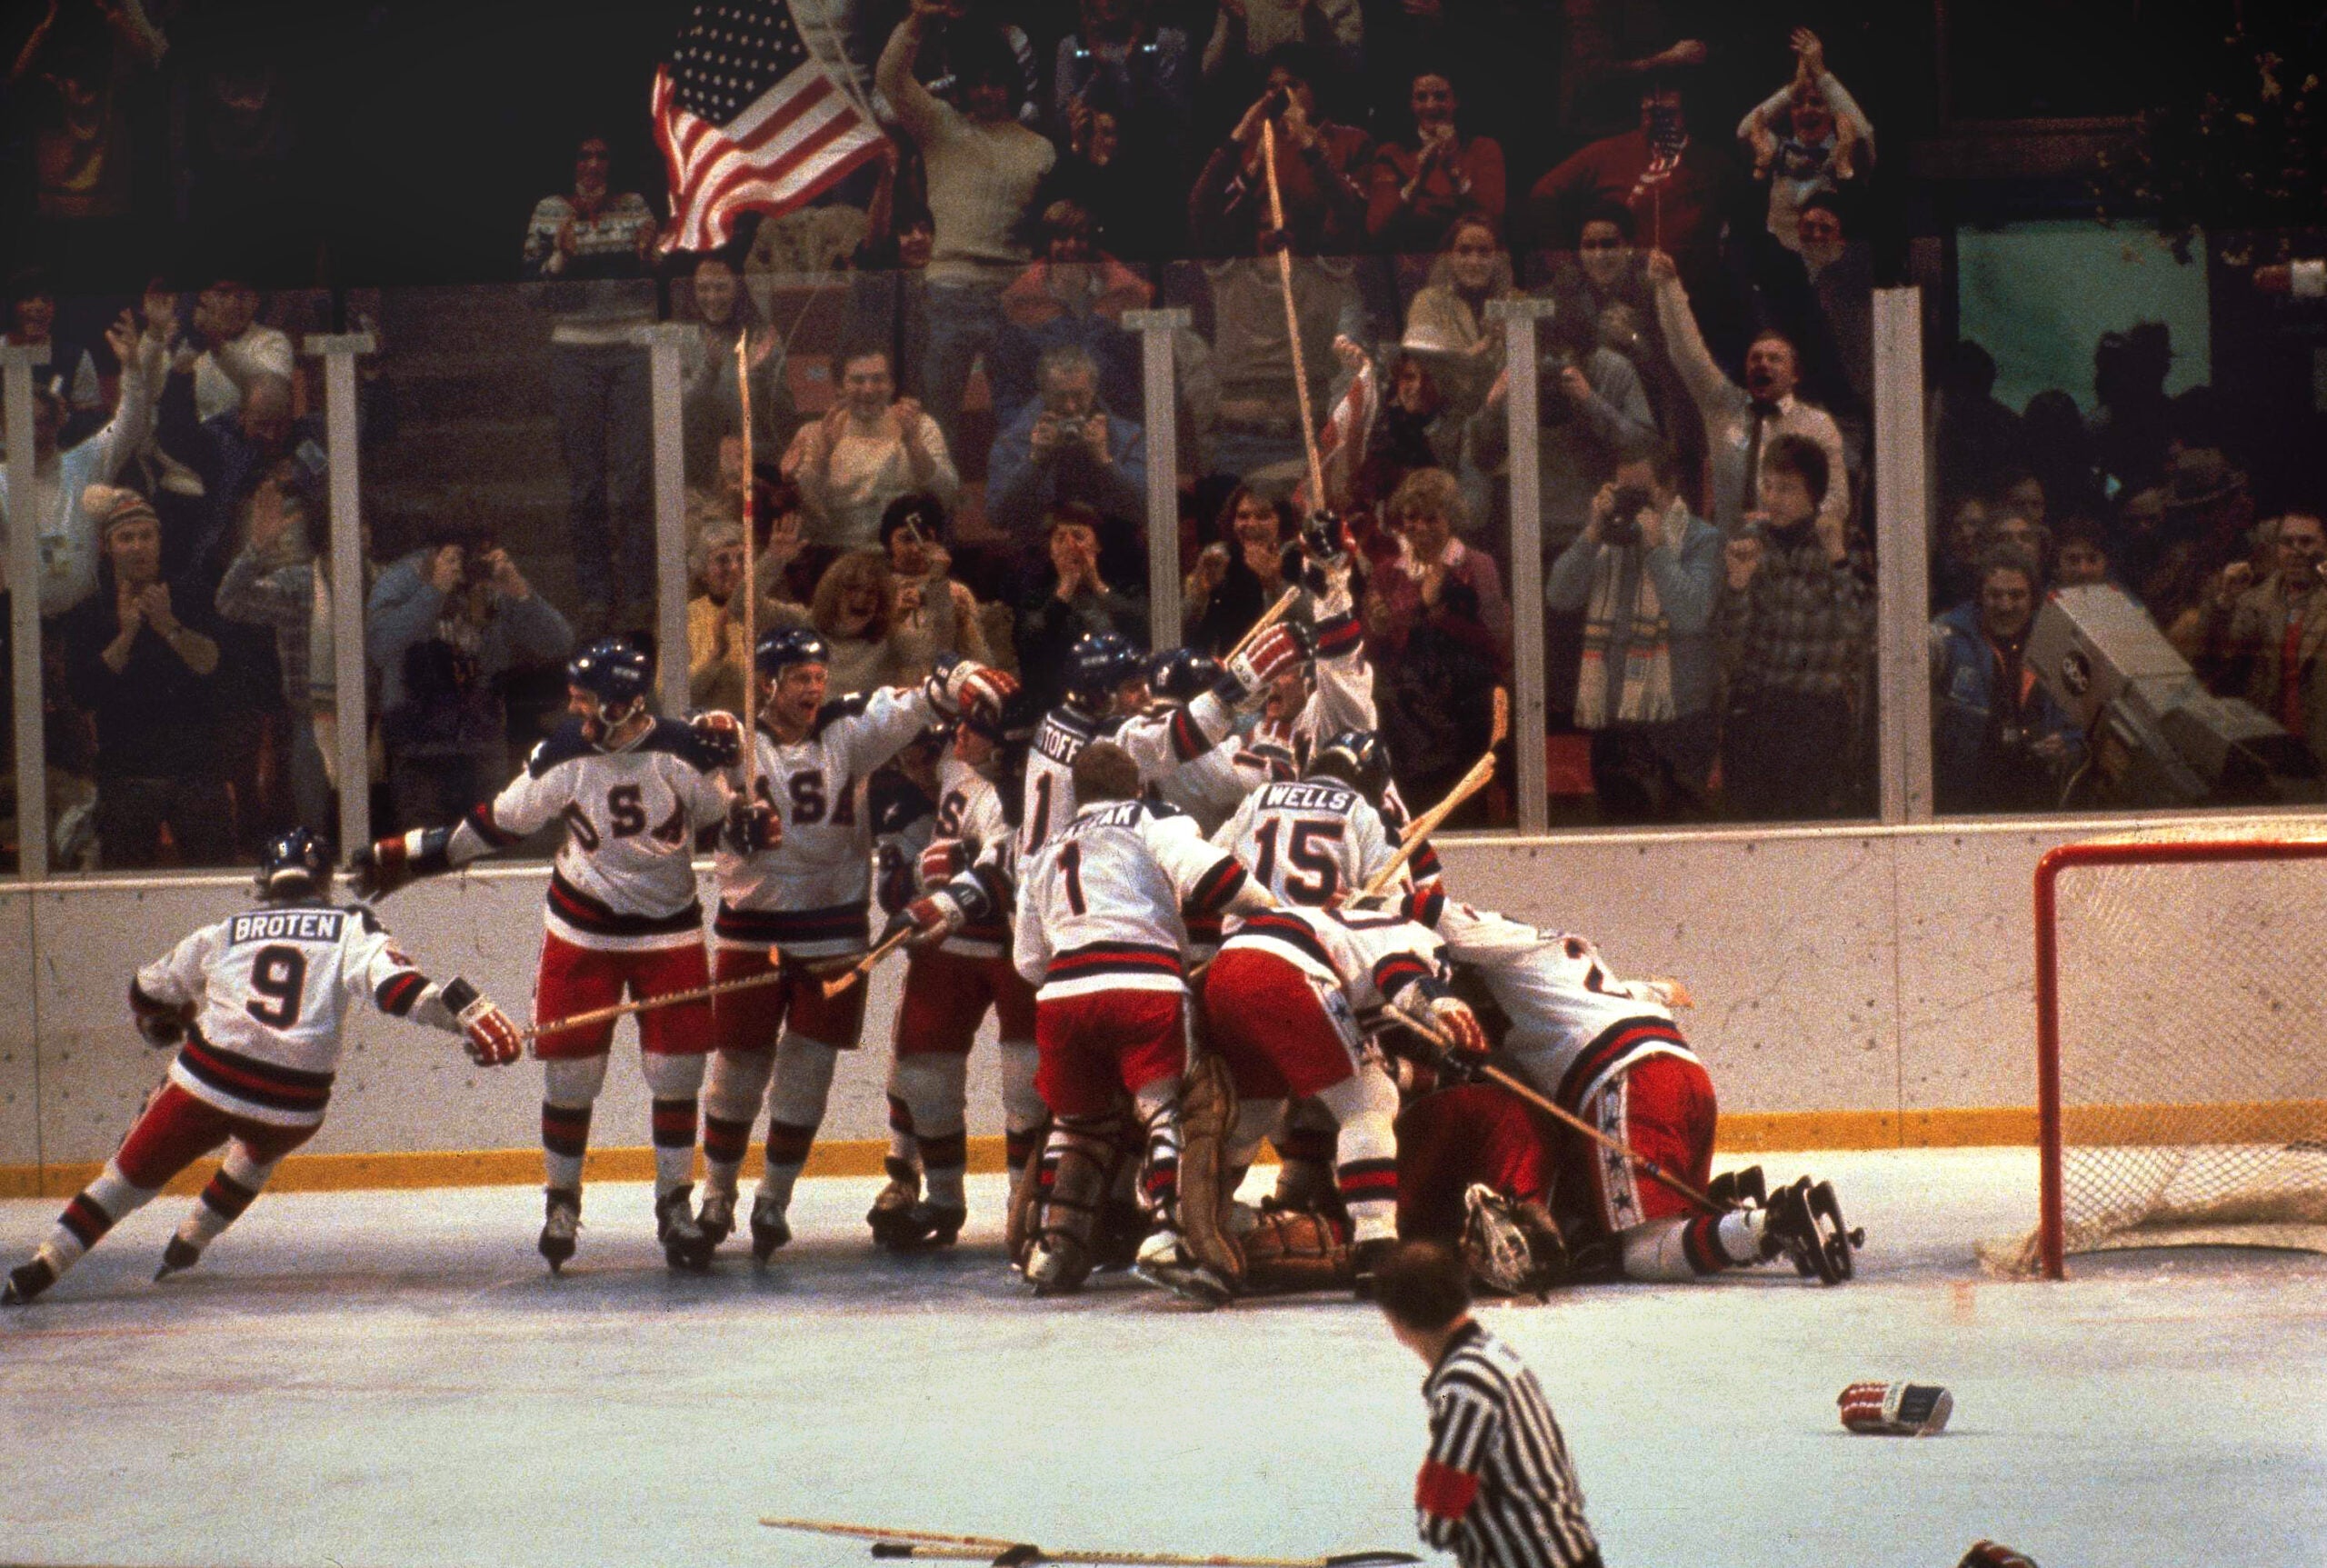 35 years since 'Miracle on Ice', Olympic gold still highlights